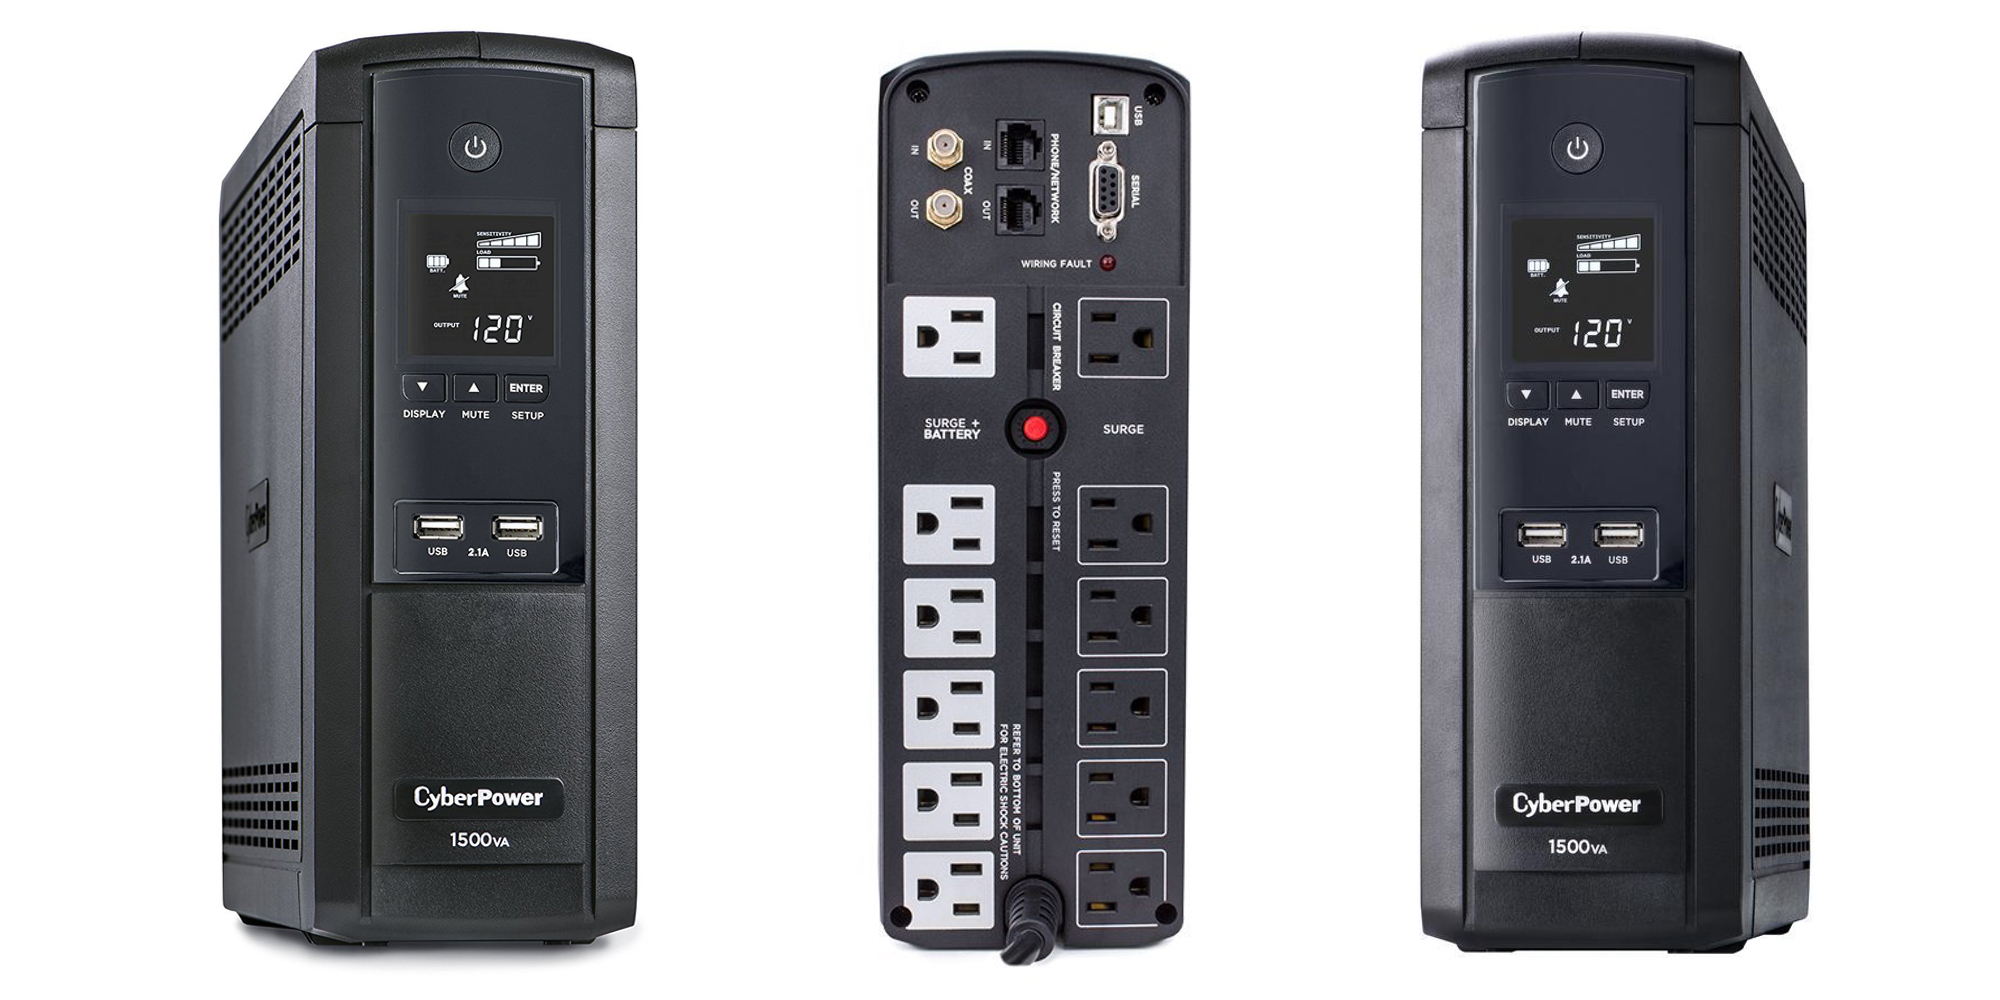 CyberPower's 1500VA 10-outlet UPS can power all your gadgets at $120